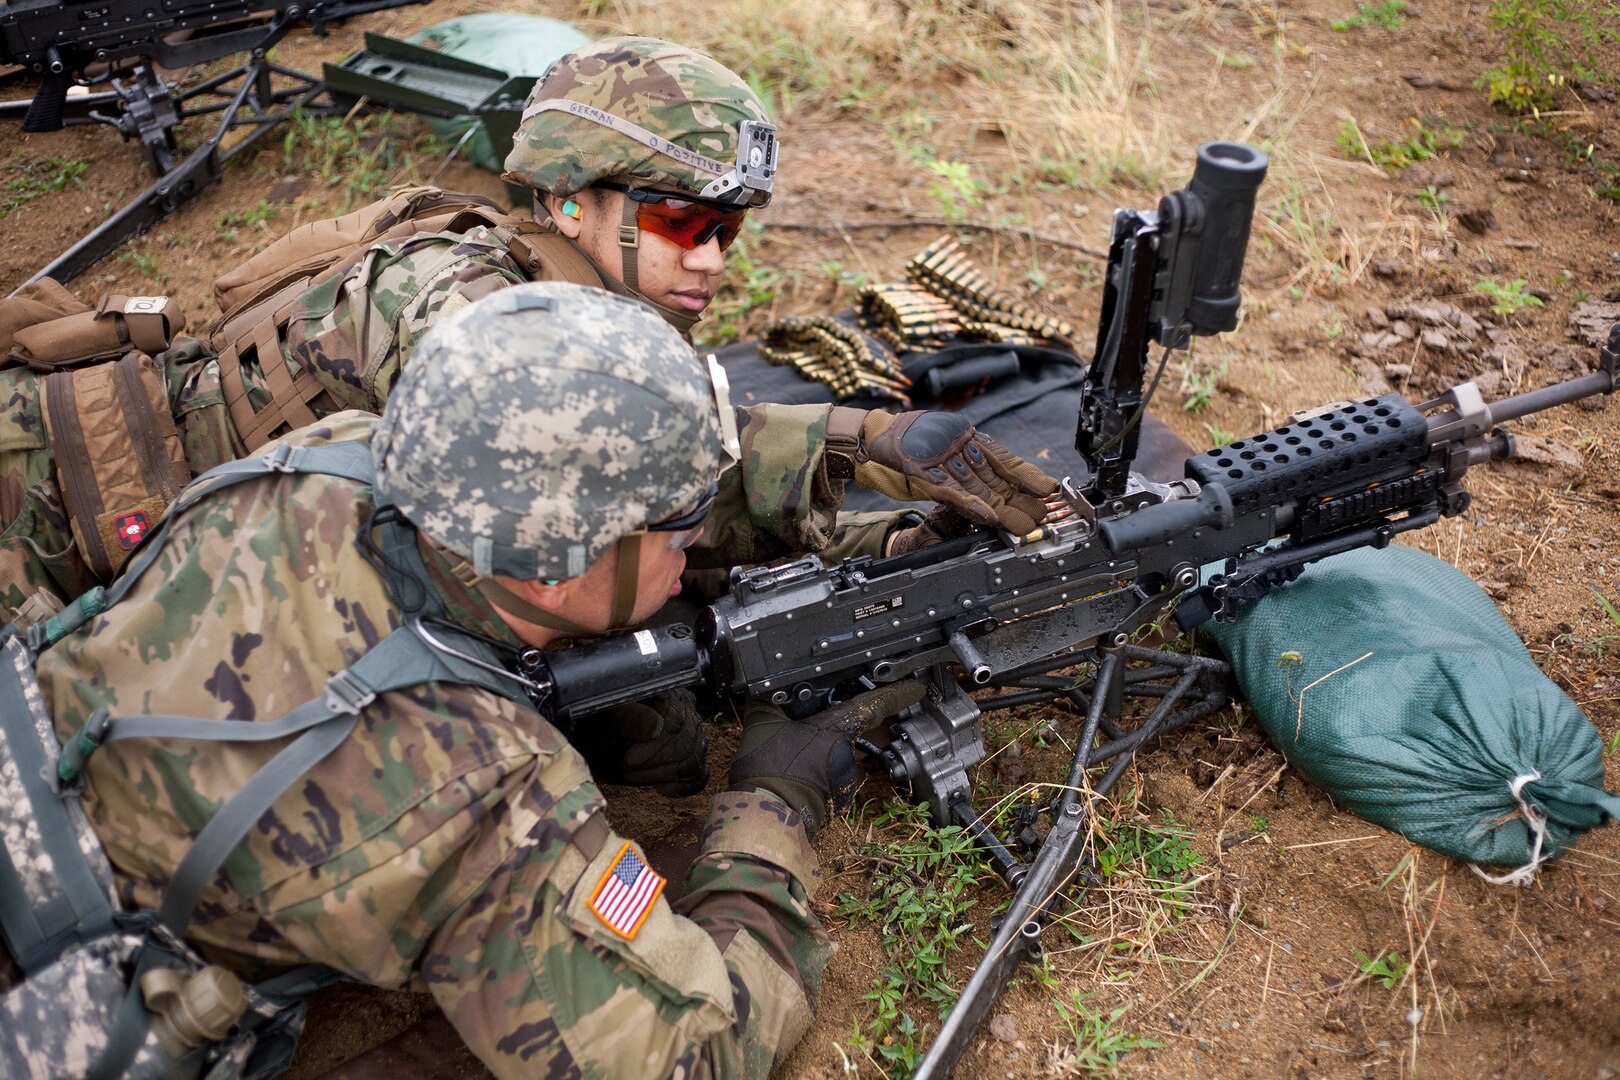 New York Army National Guard Soldiers assigned to Alpha Company, 1st Battalion, 69th Infantry Regiment, fire a Squad Automatic Weapon at Camp Santiago, Puerto Rico, on  April 13, 2019. While in Puerto Rico the Soldiers honed their fighting skills by practicing short-range marksmanship techniques.